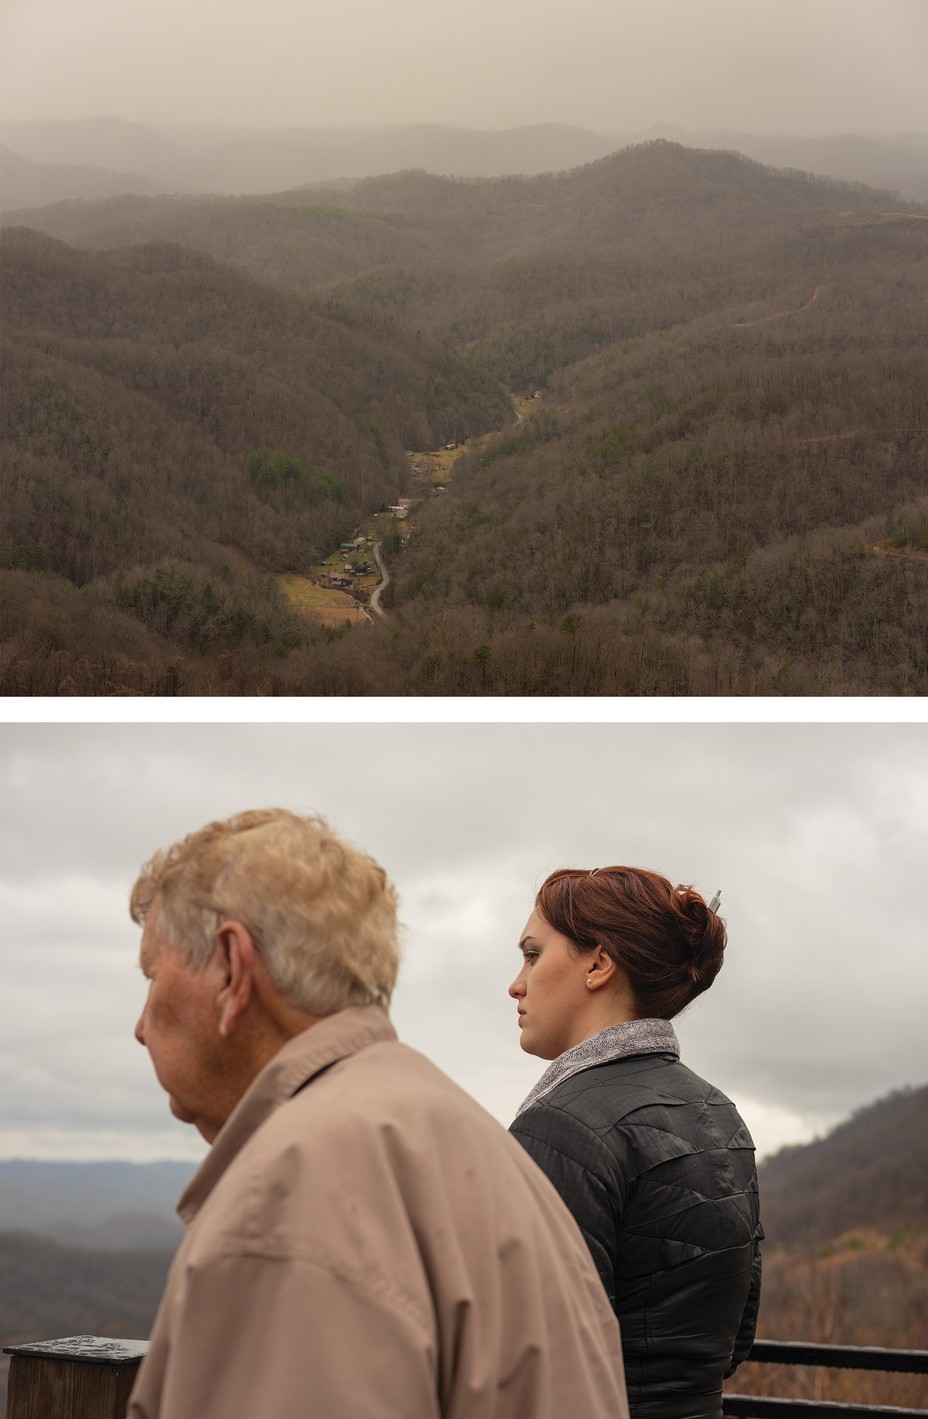 top: Letcher County, Kentucky; bottom: Nikki King and grandfather Curt King